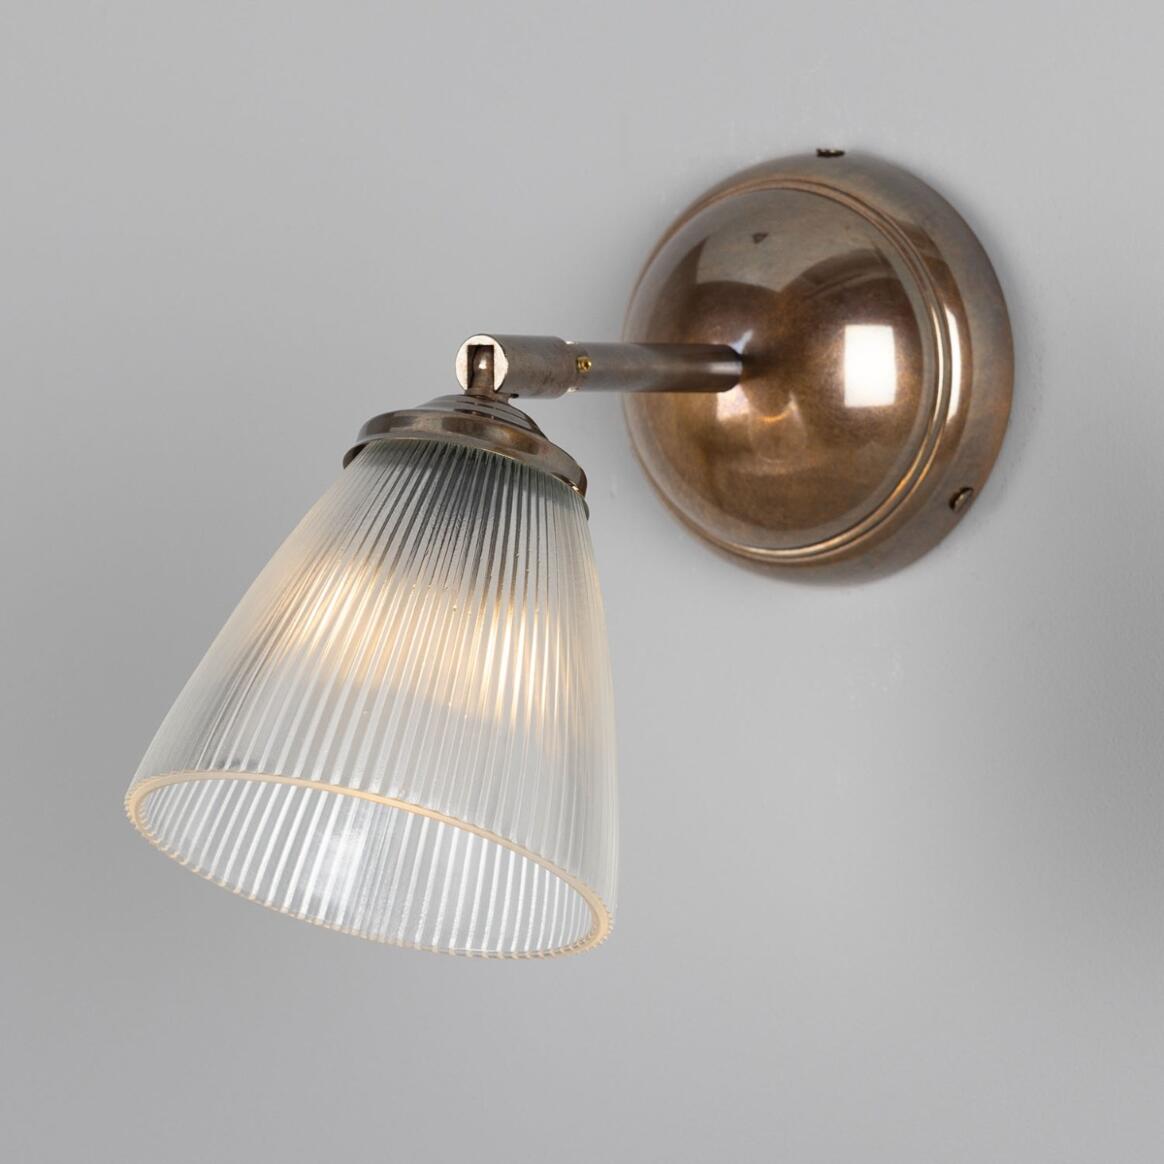 Gadar Vintage Prismatic Glass Wall Light with Swivel main product image